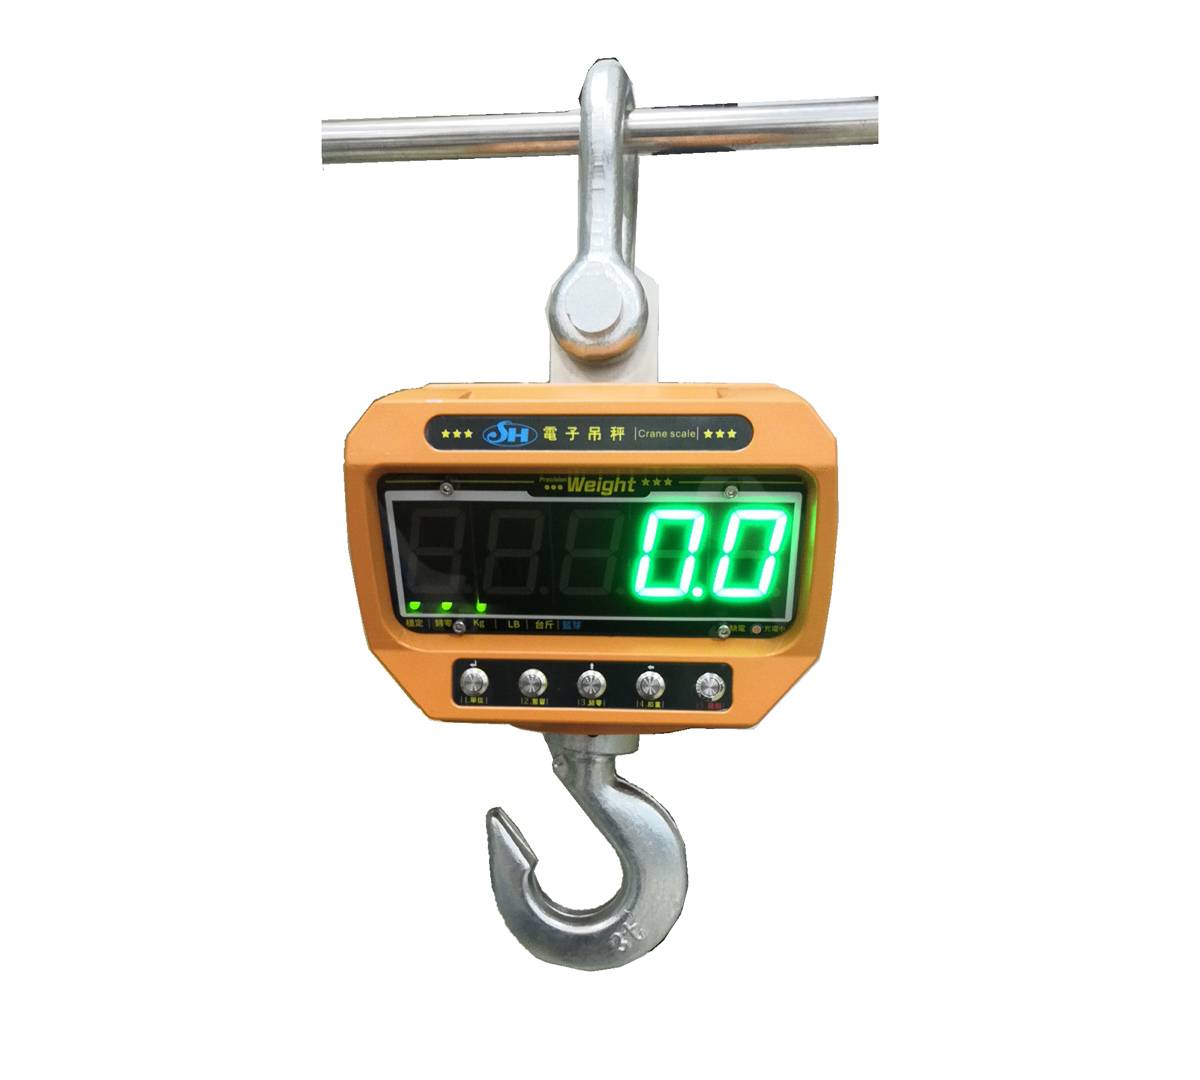 Super Lowest Price Weighing Scale With Alarm - OTC Crane Scale – JIAJIA